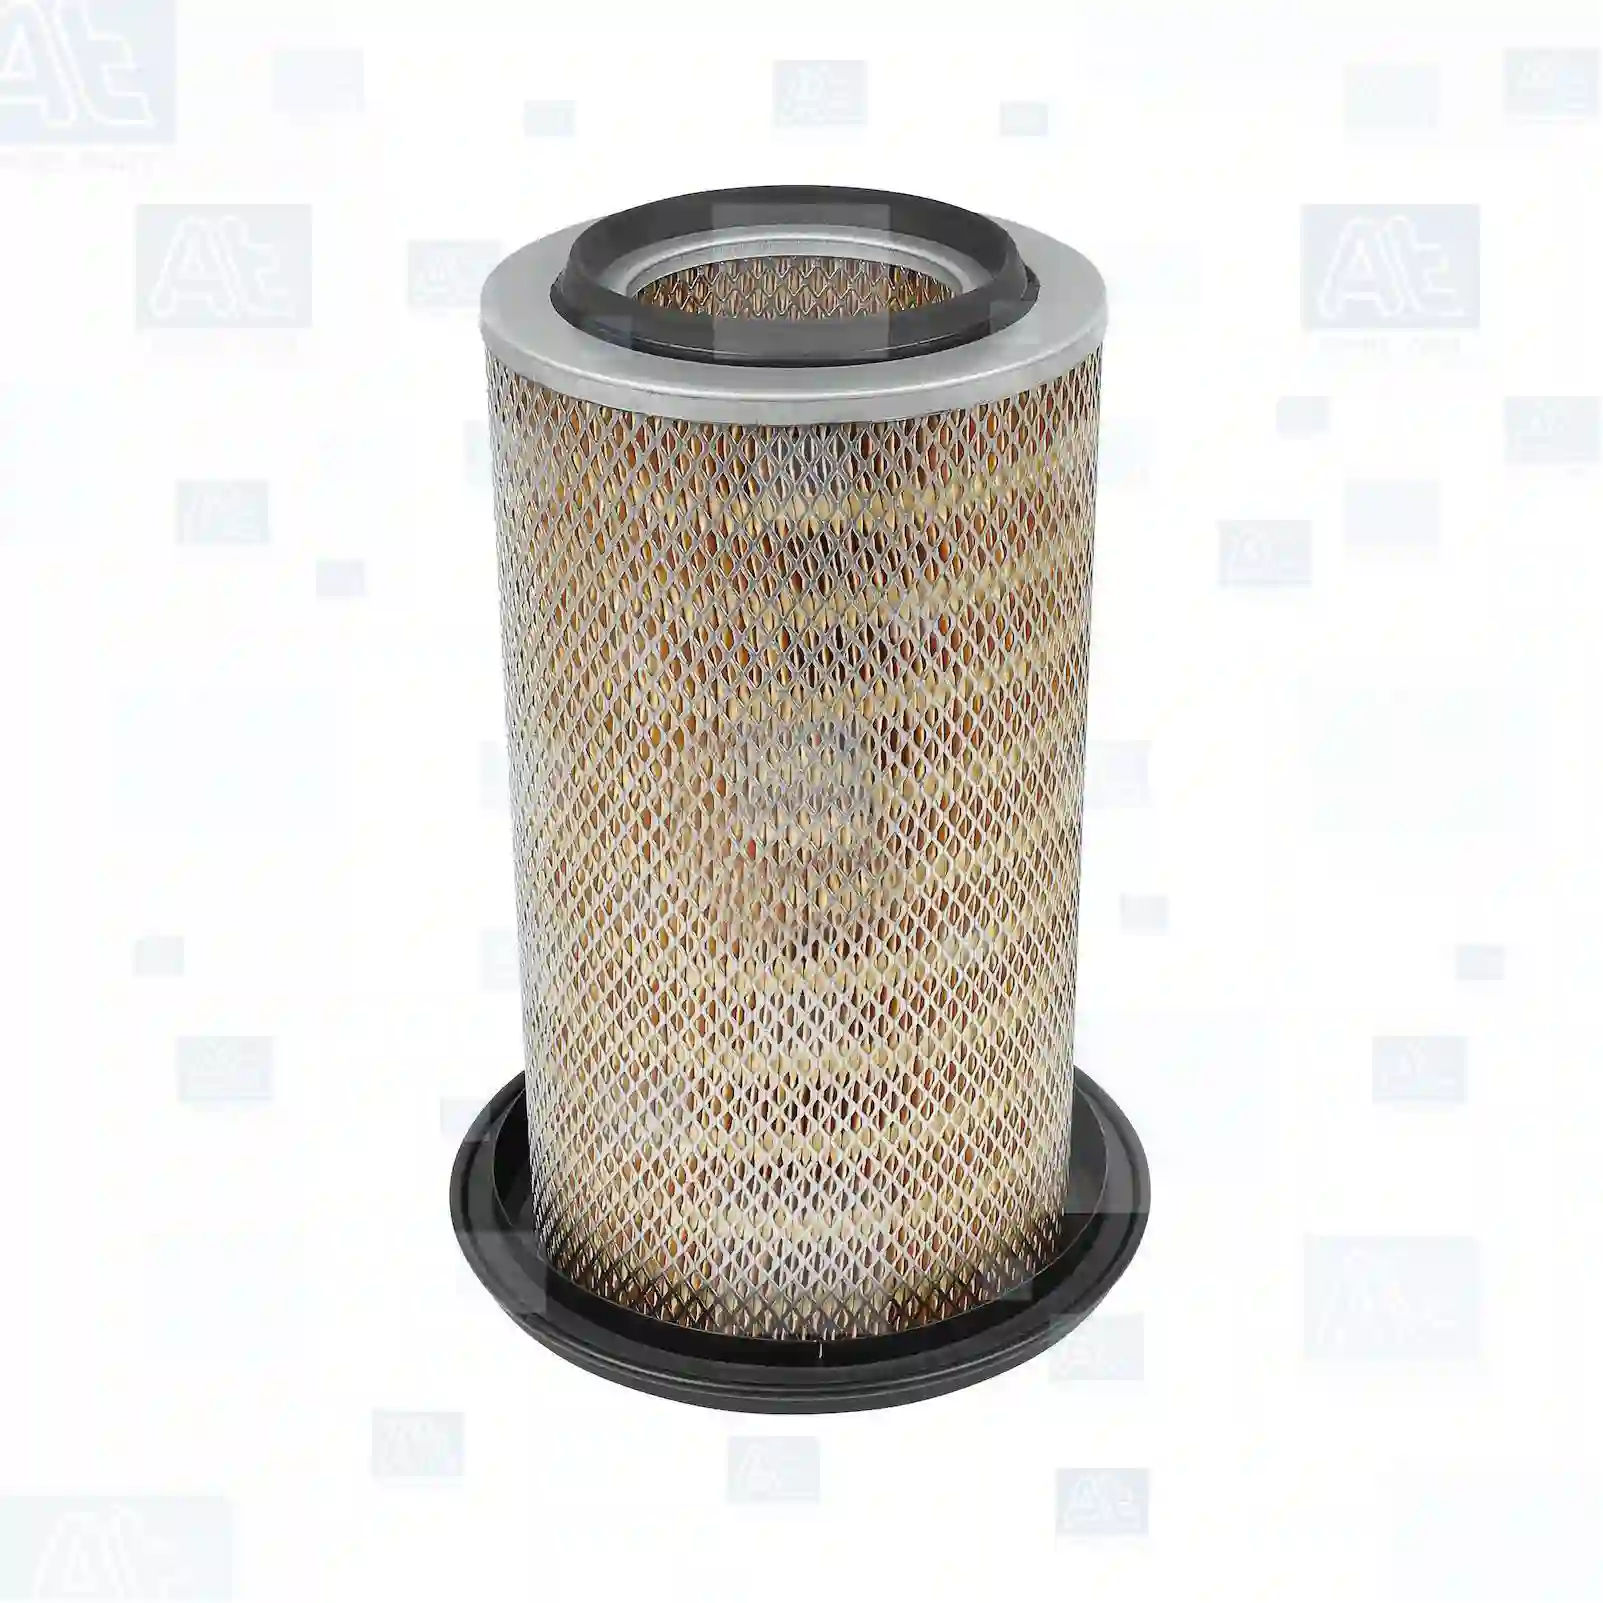 Air filter, 77706187, E061348, N6778, XD091927, XD91927, 0505412, 505412, 956612, 95661200, 02241034, 7151059010, 1470823, 4134474, 02241034, 5011320, 5011551, 156946109, 02241034, AZ23644, 02241034, 7000738, 2191P140132, 04532559104, 81083040028, 2686515M1, 2868515M1, 605412970033, 0000241034, 0002241034, R941, 8319050042, 61200190002, 61200190038, 61200190701, 3522507, CH12232 ||  77706187 At Spare Part | Engine, Accelerator Pedal, Camshaft, Connecting Rod, Crankcase, Crankshaft, Cylinder Head, Engine Suspension Mountings, Exhaust Manifold, Exhaust Gas Recirculation, Filter Kits, Flywheel Housing, General Overhaul Kits, Engine, Intake Manifold, Oil Cleaner, Oil Cooler, Oil Filter, Oil Pump, Oil Sump, Piston & Liner, Sensor & Switch, Timing Case, Turbocharger, Cooling System, Belt Tensioner, Coolant Filter, Coolant Pipe, Corrosion Prevention Agent, Drive, Expansion Tank, Fan, Intercooler, Monitors & Gauges, Radiator, Thermostat, V-Belt / Timing belt, Water Pump, Fuel System, Electronical Injector Unit, Feed Pump, Fuel Filter, cpl., Fuel Gauge Sender,  Fuel Line, Fuel Pump, Fuel Tank, Injection Line Kit, Injection Pump, Exhaust System, Clutch & Pedal, Gearbox, Propeller Shaft, Axles, Brake System, Hubs & Wheels, Suspension, Leaf Spring, Universal Parts / Accessories, Steering, Electrical System, Cabin Air filter, 77706187, E061348, N6778, XD091927, XD91927, 0505412, 505412, 956612, 95661200, 02241034, 7151059010, 1470823, 4134474, 02241034, 5011320, 5011551, 156946109, 02241034, AZ23644, 02241034, 7000738, 2191P140132, 04532559104, 81083040028, 2686515M1, 2868515M1, 605412970033, 0000241034, 0002241034, R941, 8319050042, 61200190002, 61200190038, 61200190701, 3522507, CH12232 ||  77706187 At Spare Part | Engine, Accelerator Pedal, Camshaft, Connecting Rod, Crankcase, Crankshaft, Cylinder Head, Engine Suspension Mountings, Exhaust Manifold, Exhaust Gas Recirculation, Filter Kits, Flywheel Housing, General Overhaul Kits, Engine, Intake Manifold, Oil Cleaner, Oil Cooler, Oil Filter, Oil Pump, Oil Sump, Piston & Liner, Sensor & Switch, Timing Case, Turbocharger, Cooling System, Belt Tensioner, Coolant Filter, Coolant Pipe, Corrosion Prevention Agent, Drive, Expansion Tank, Fan, Intercooler, Monitors & Gauges, Radiator, Thermostat, V-Belt / Timing belt, Water Pump, Fuel System, Electronical Injector Unit, Feed Pump, Fuel Filter, cpl., Fuel Gauge Sender,  Fuel Line, Fuel Pump, Fuel Tank, Injection Line Kit, Injection Pump, Exhaust System, Clutch & Pedal, Gearbox, Propeller Shaft, Axles, Brake System, Hubs & Wheels, Suspension, Leaf Spring, Universal Parts / Accessories, Steering, Electrical System, Cabin